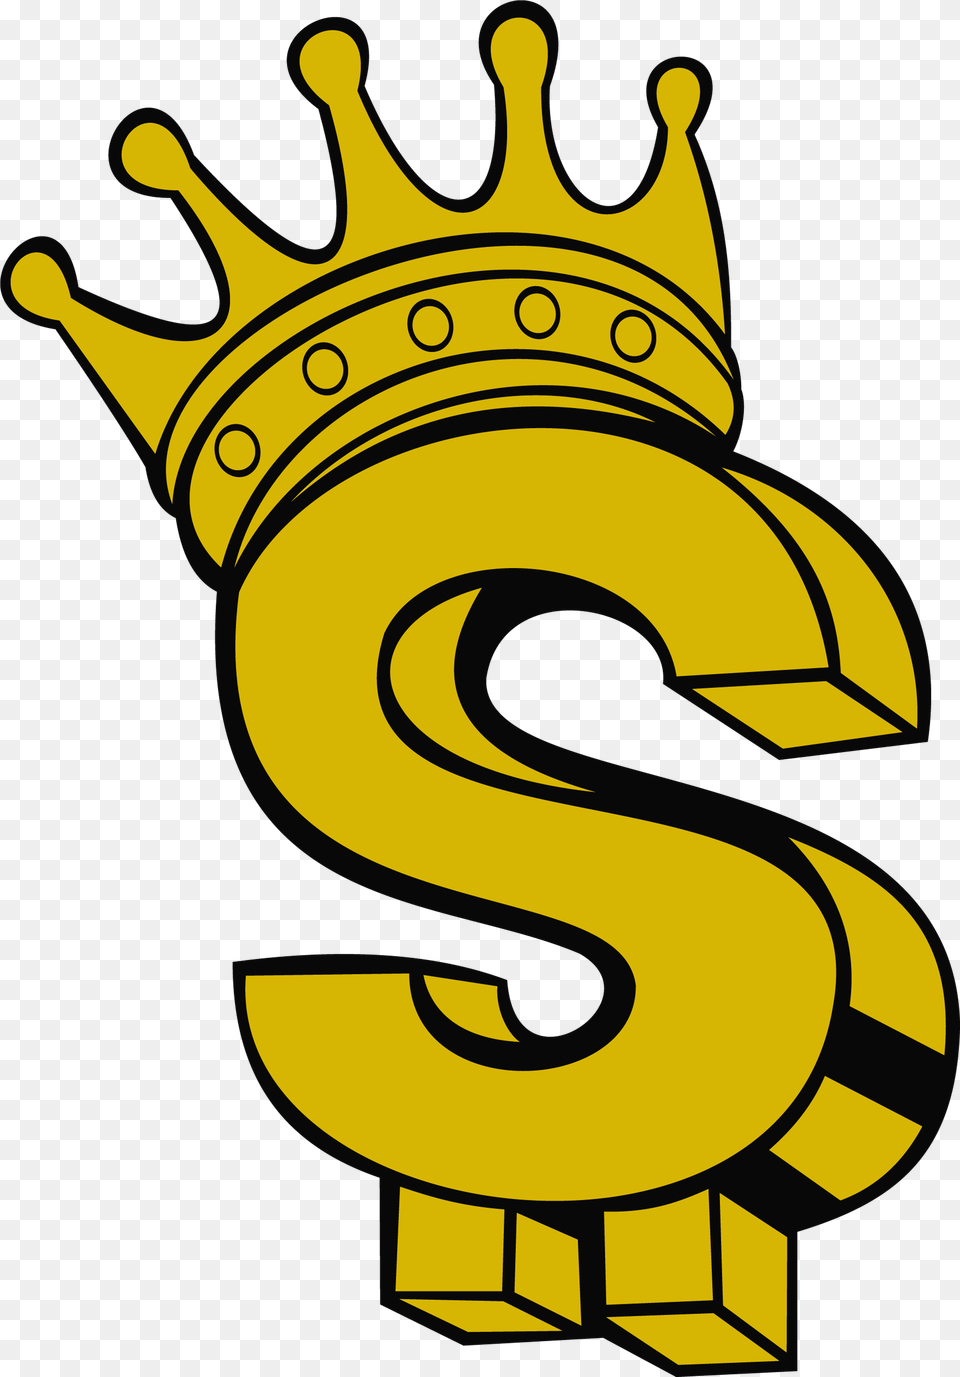 Download Wearing Dollar Crown Royalty Coin With Sign Hq Dollar Sign With Crown, Symbol, Number, Text, Logo Png